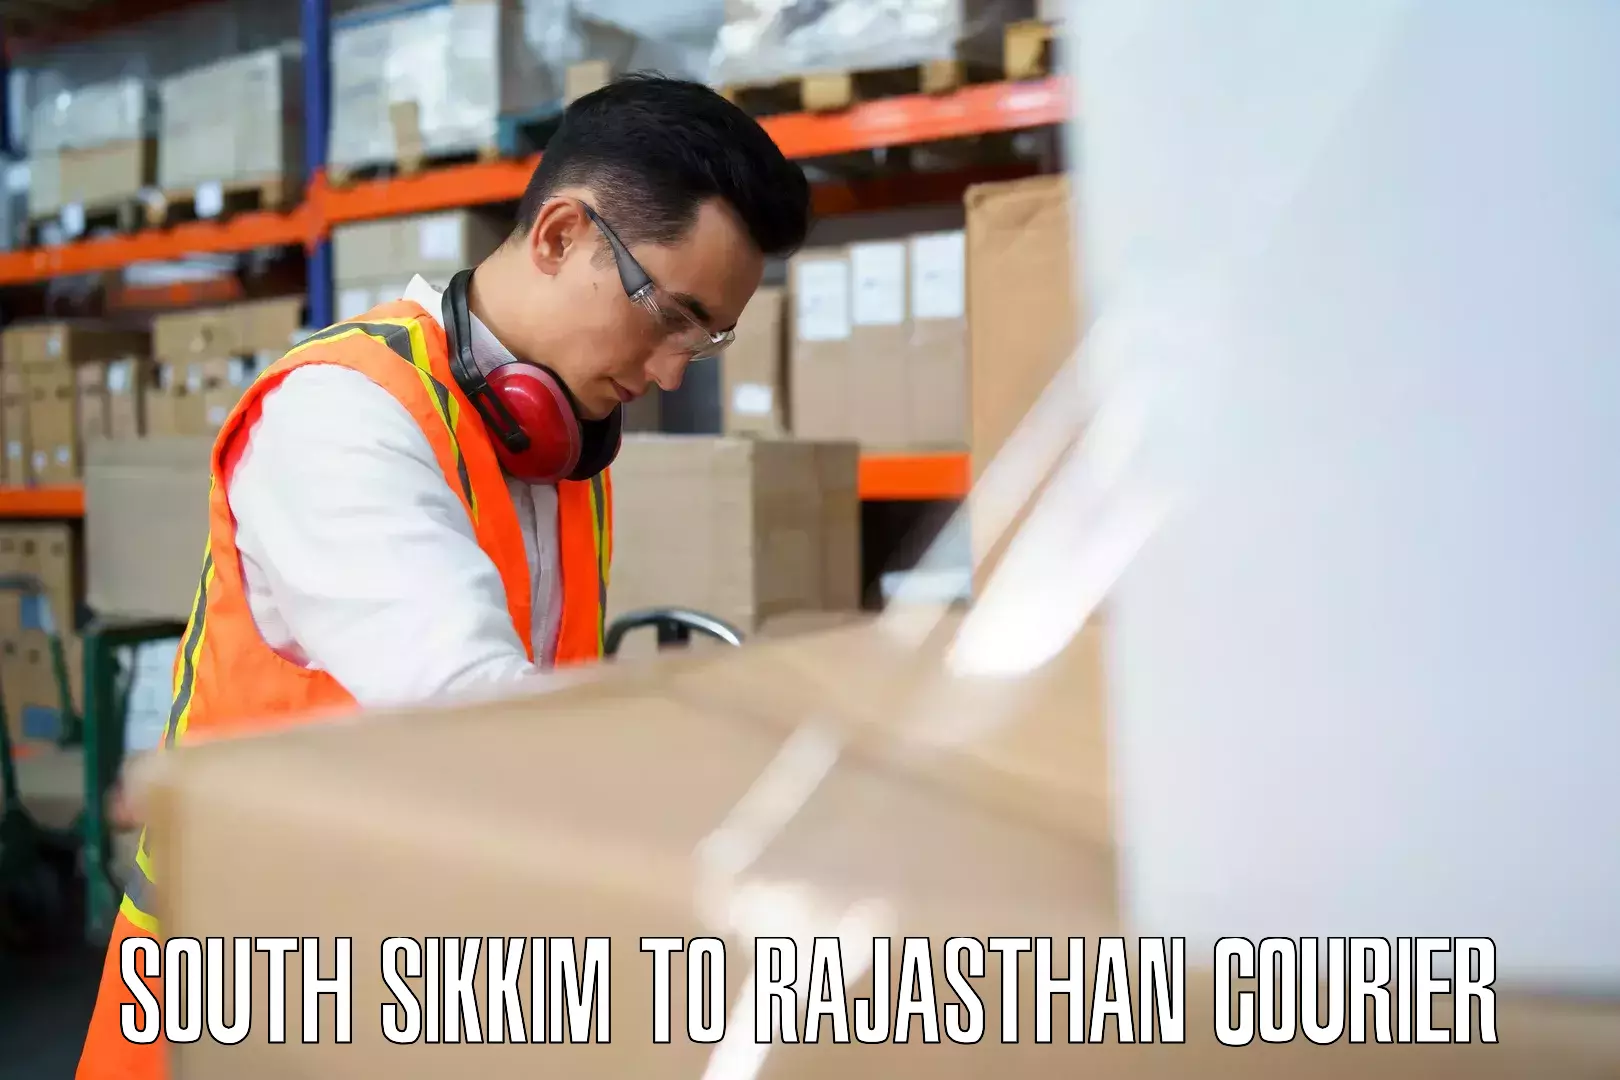 Luggage shipping specialists South Sikkim to Fatehpur Sikar